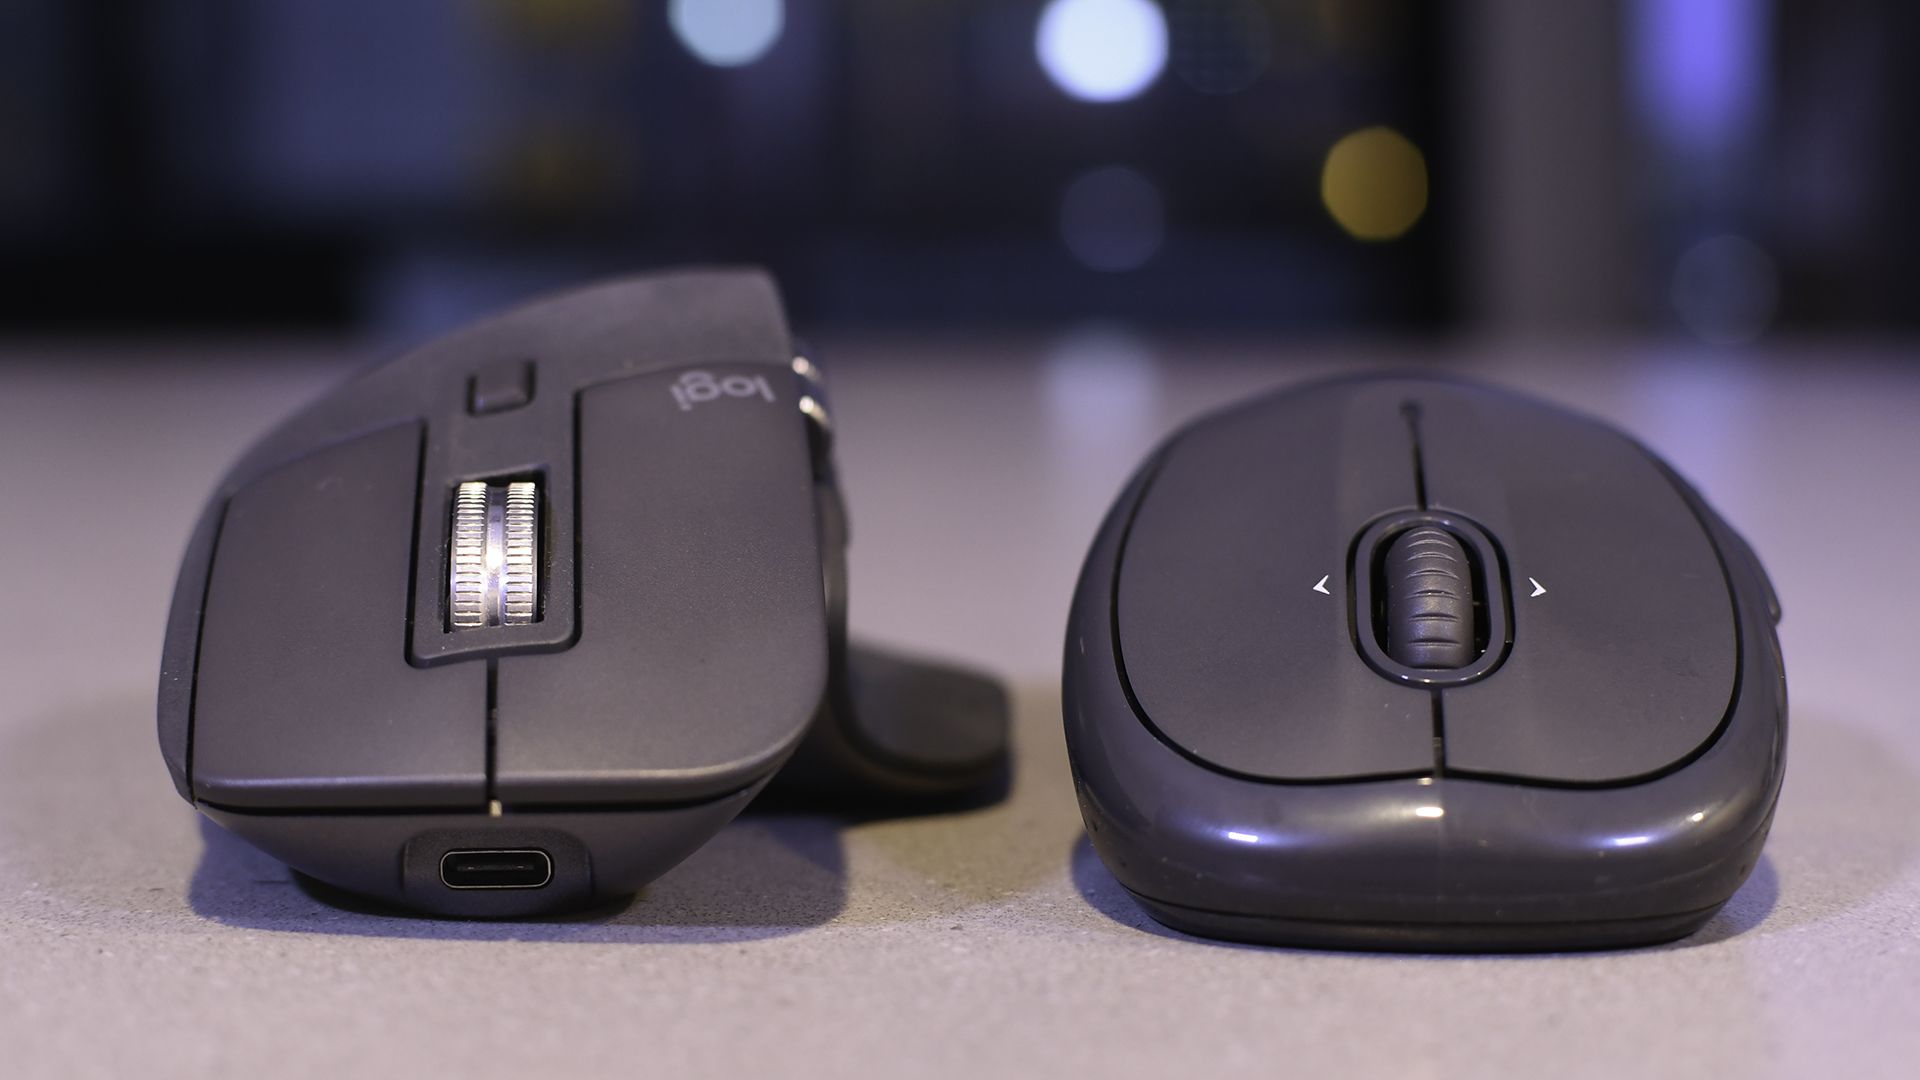 Compare prices for Motel Mouse across all European  stores